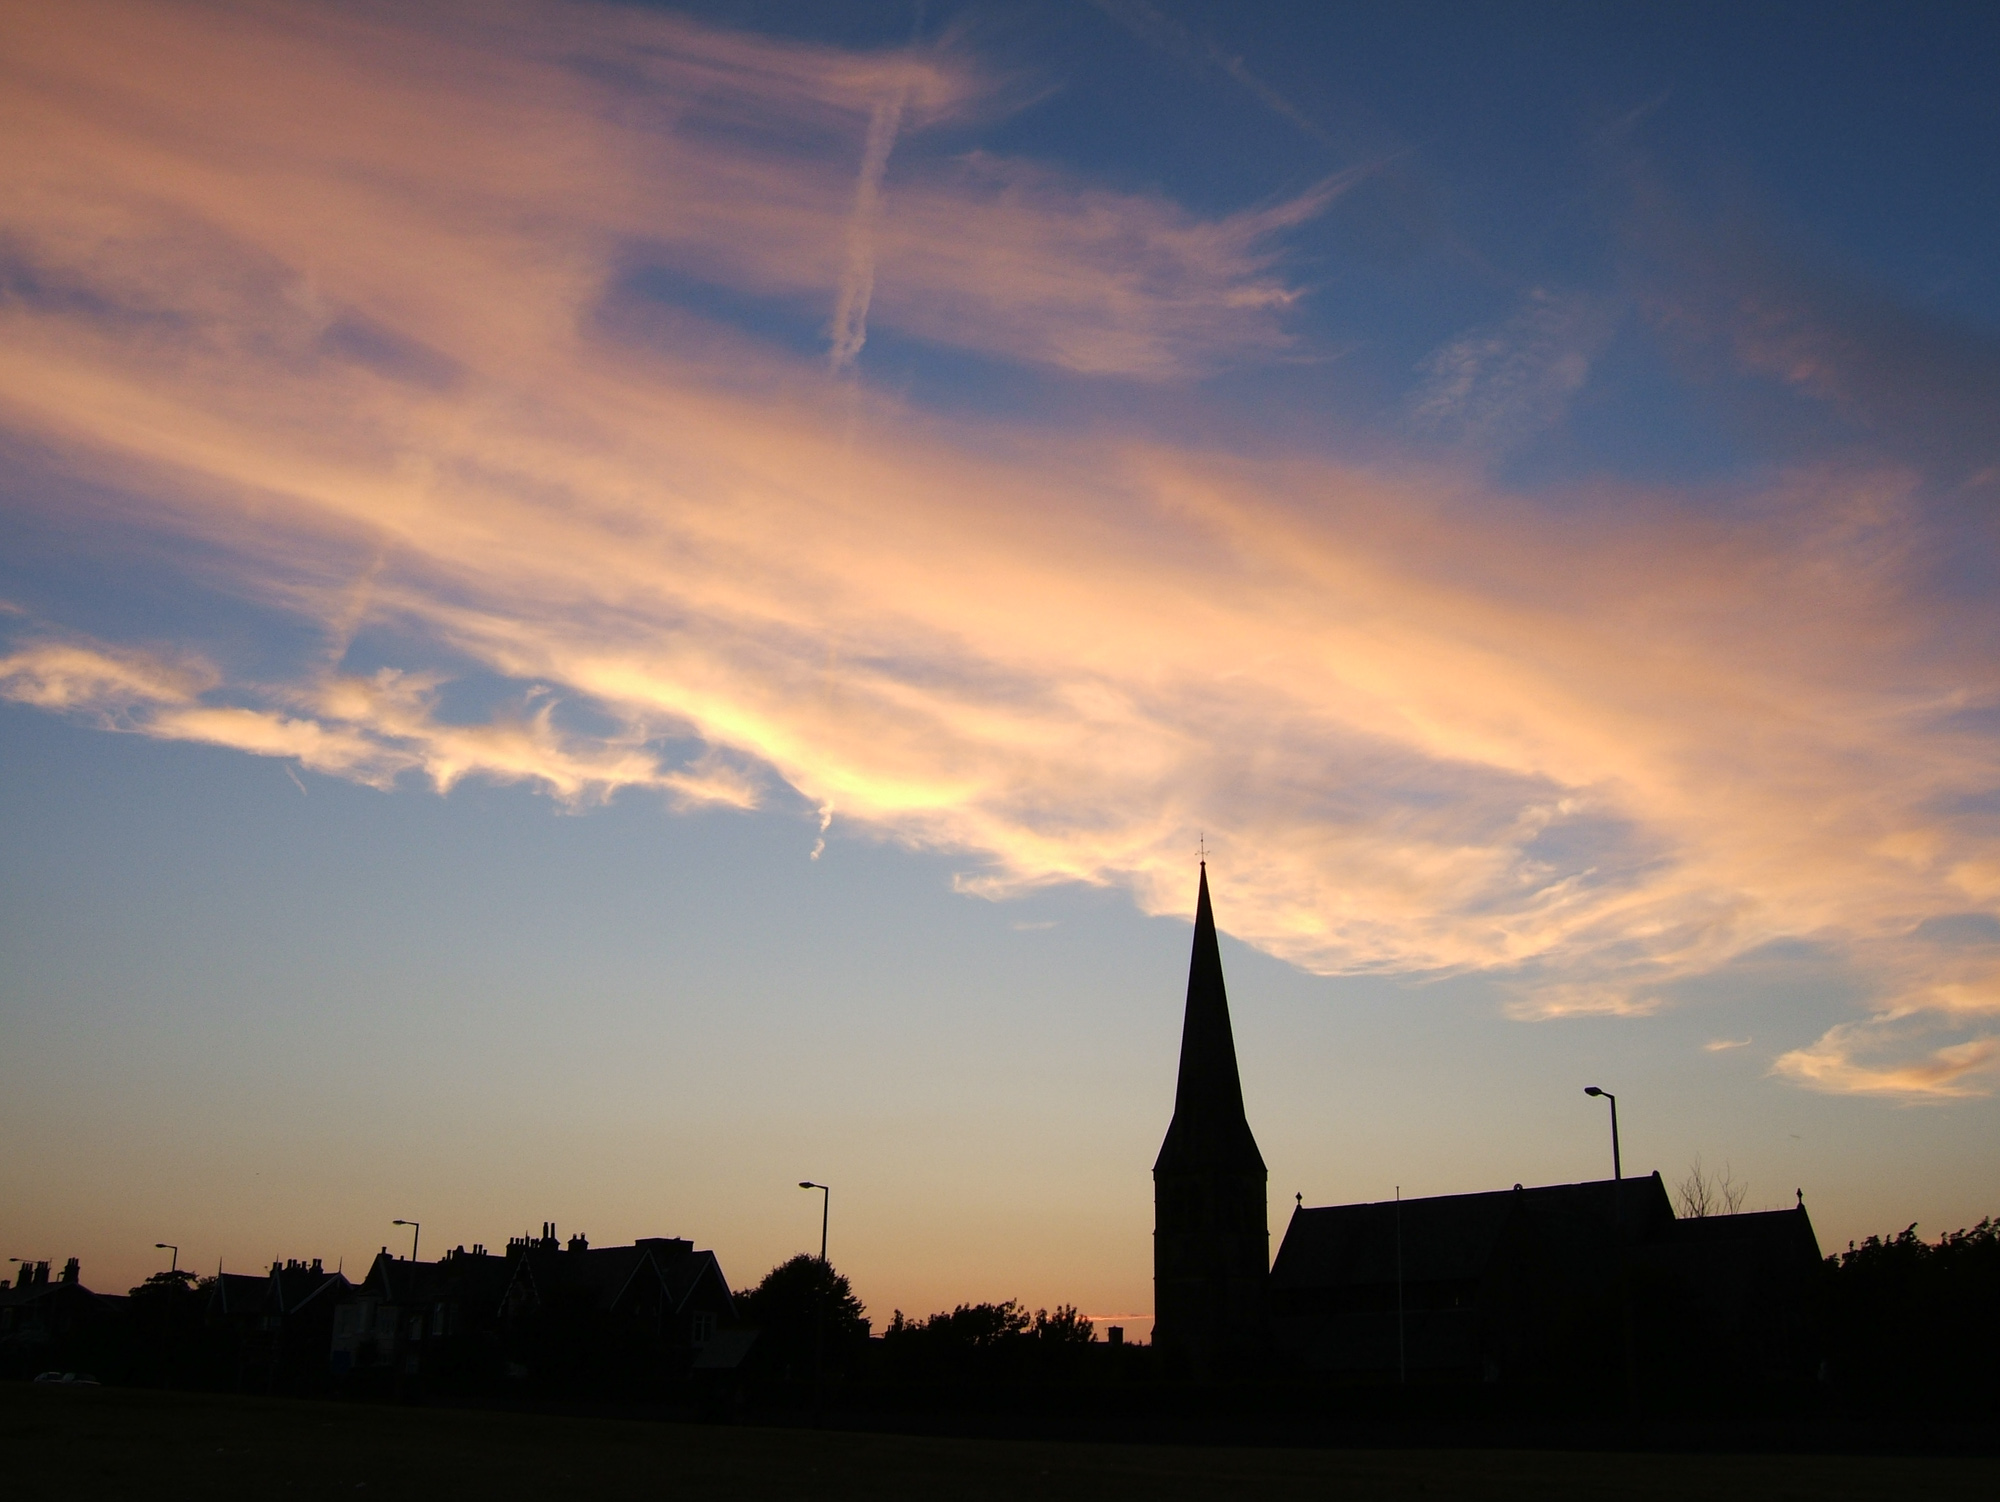 a church spire against a colorful sunset sky